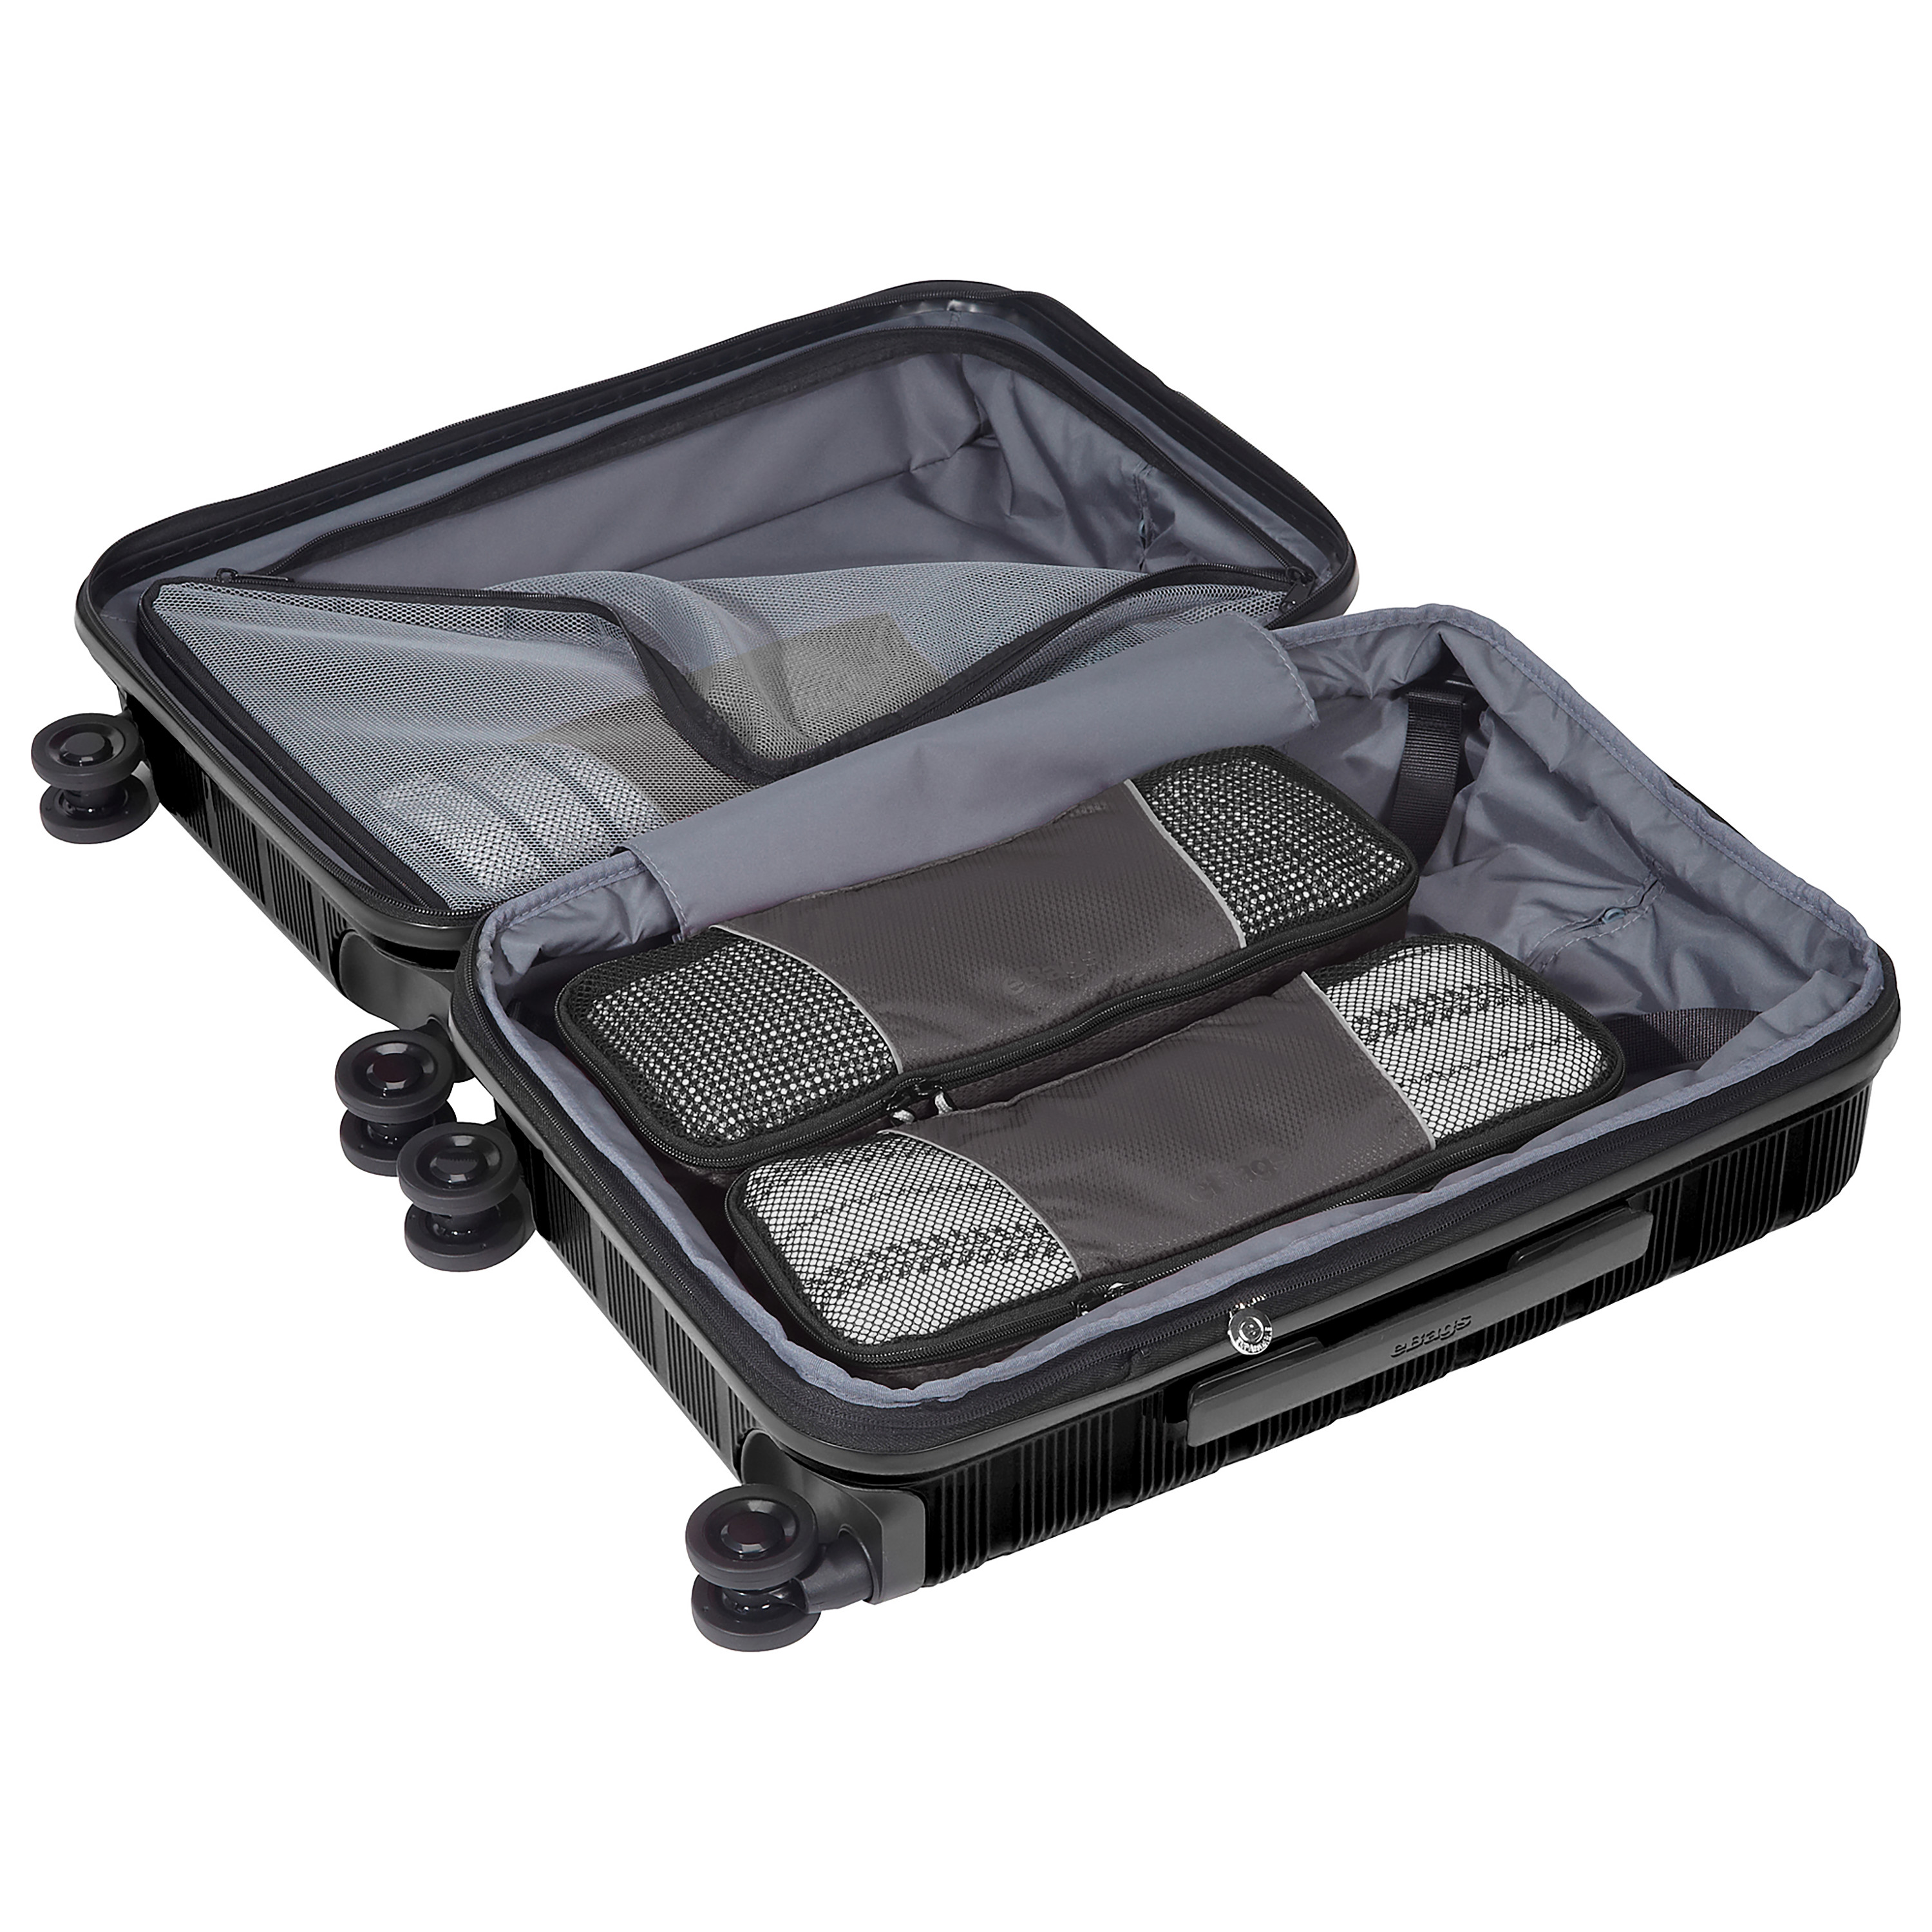  Compass Rose Travel Accessories Slim Packing Cubes